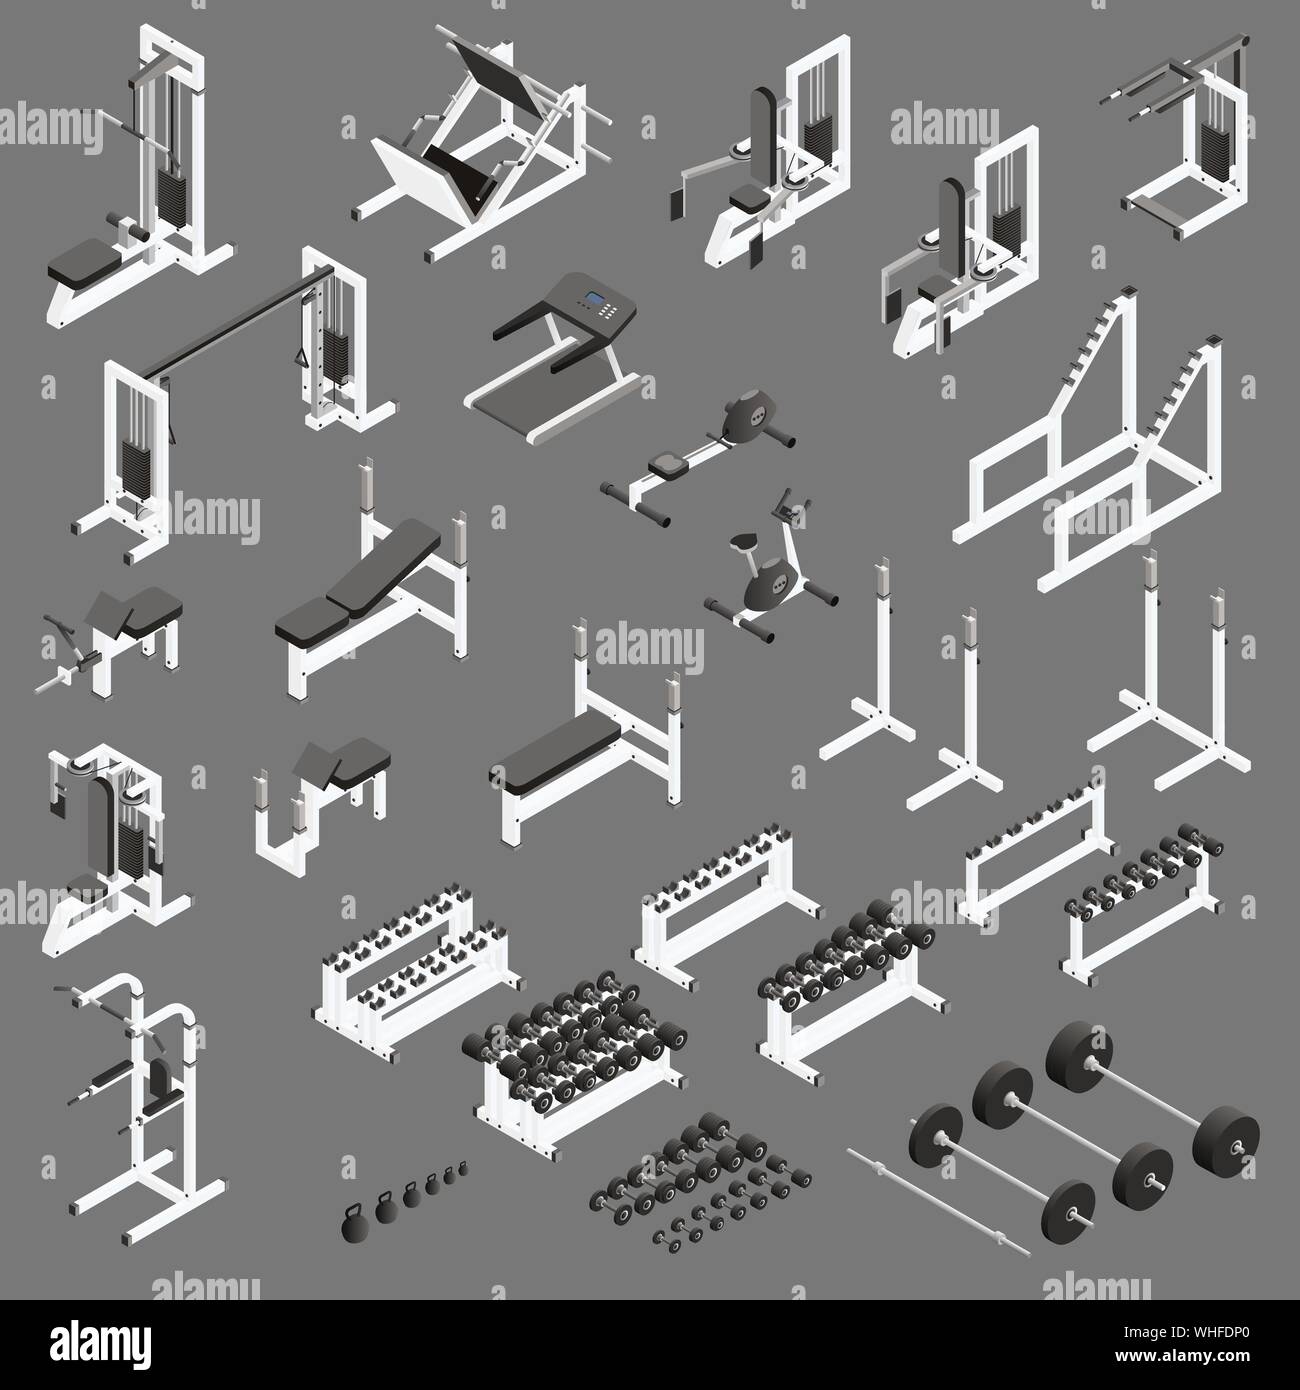 Gym equipment and machines isometric set. Vector. Stock Vector